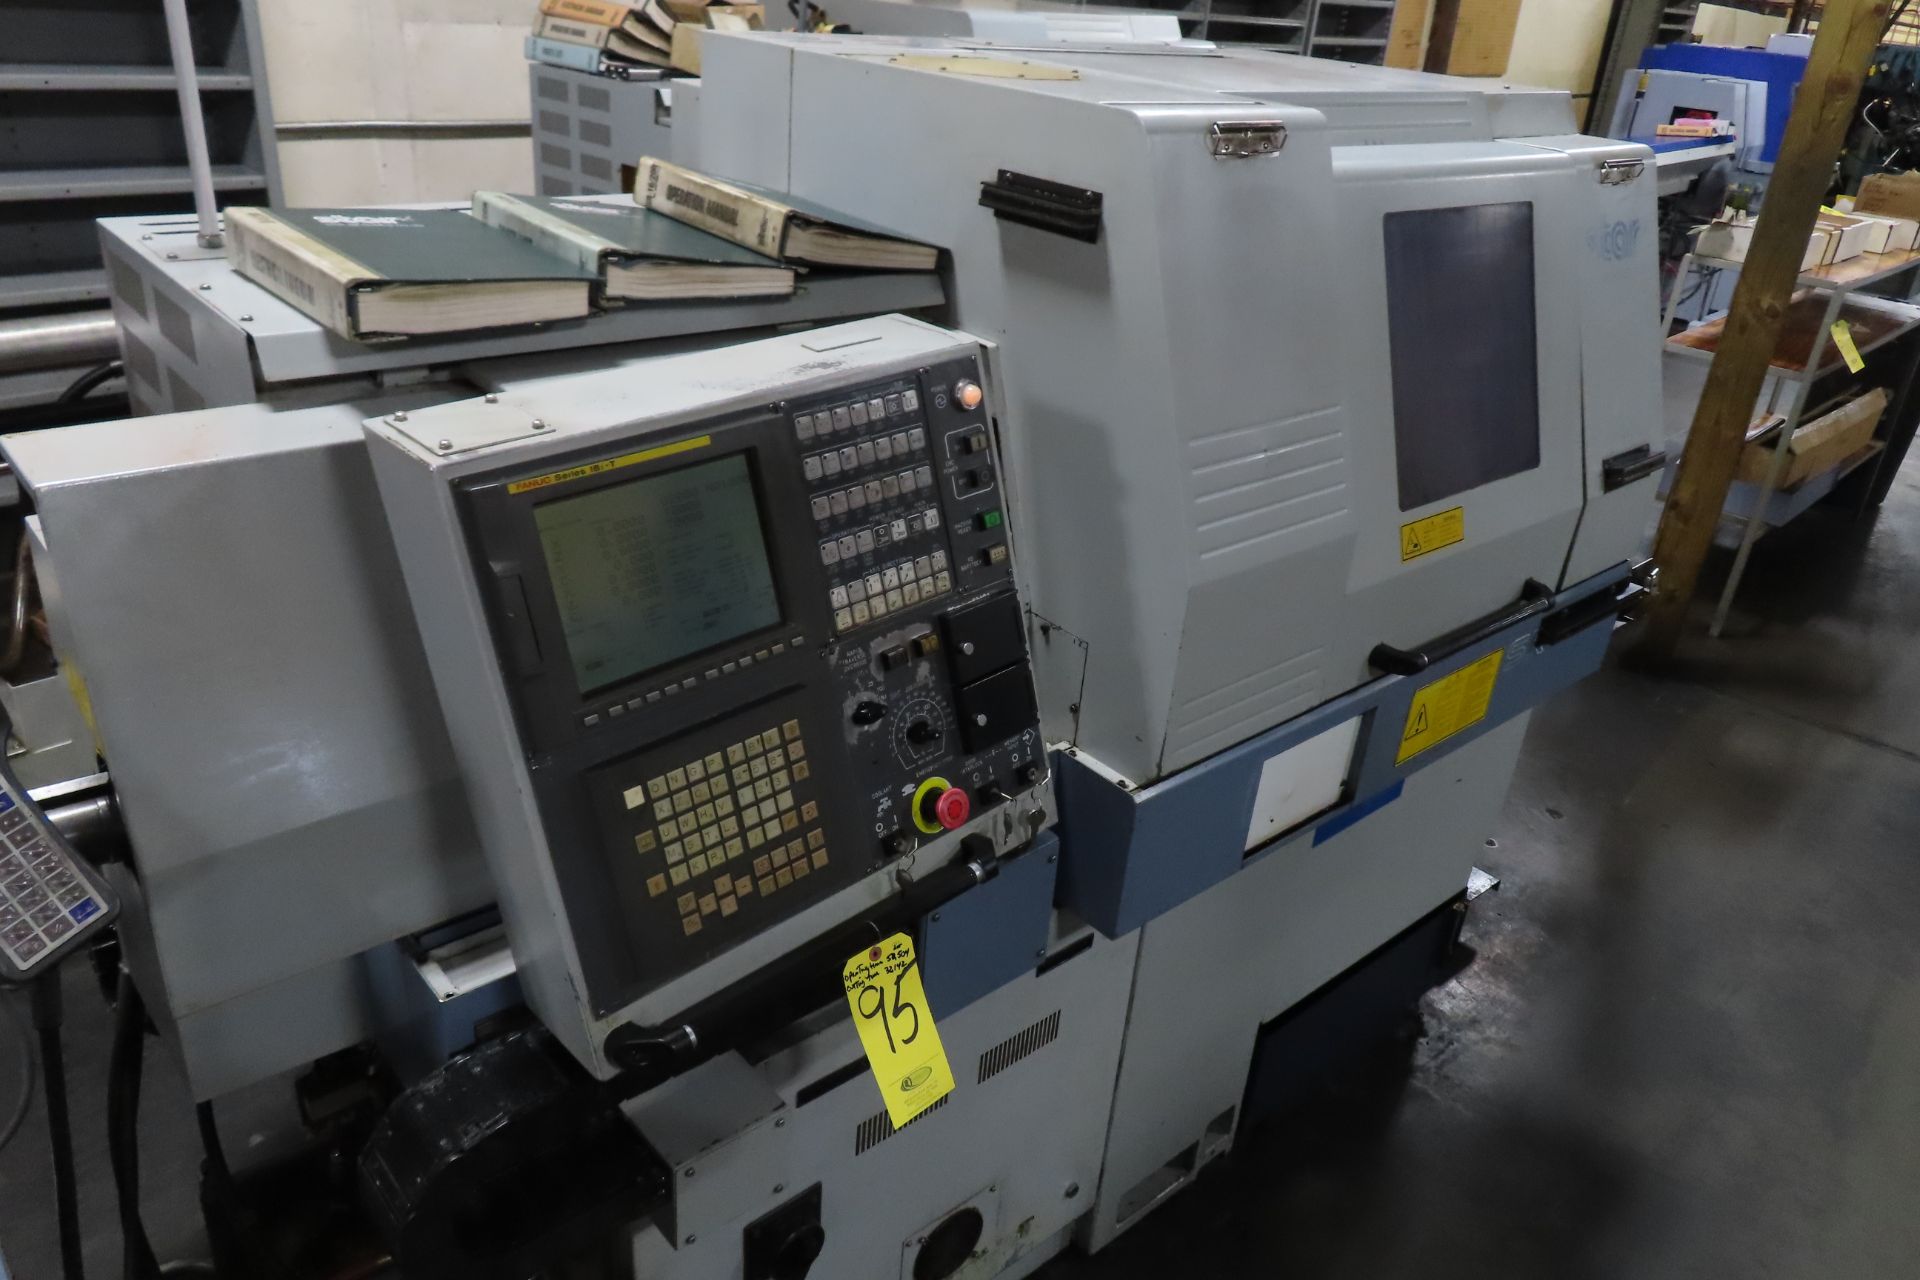 2005 STAR SR-20R 7-AXIS CNC SWISS TYPE AUTOMATIC LATHE, S/N 1242, FANUC 18i-T CONTROL, MAX MACHINING - Image 17 of 25